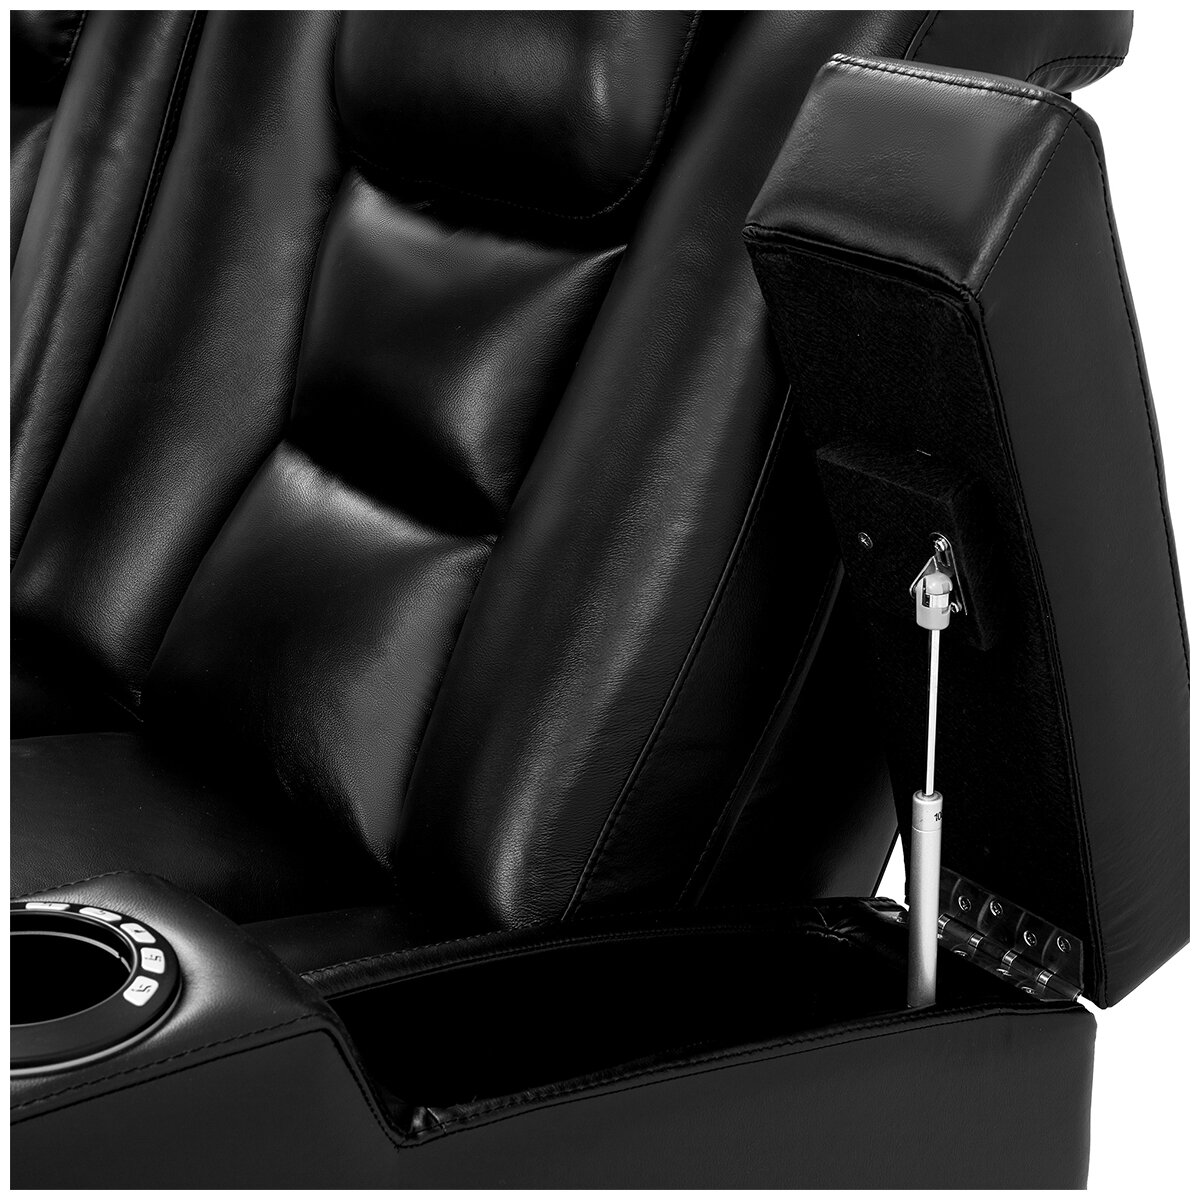 Valencia Theater Seating Venice 1 Seater Recliner Black